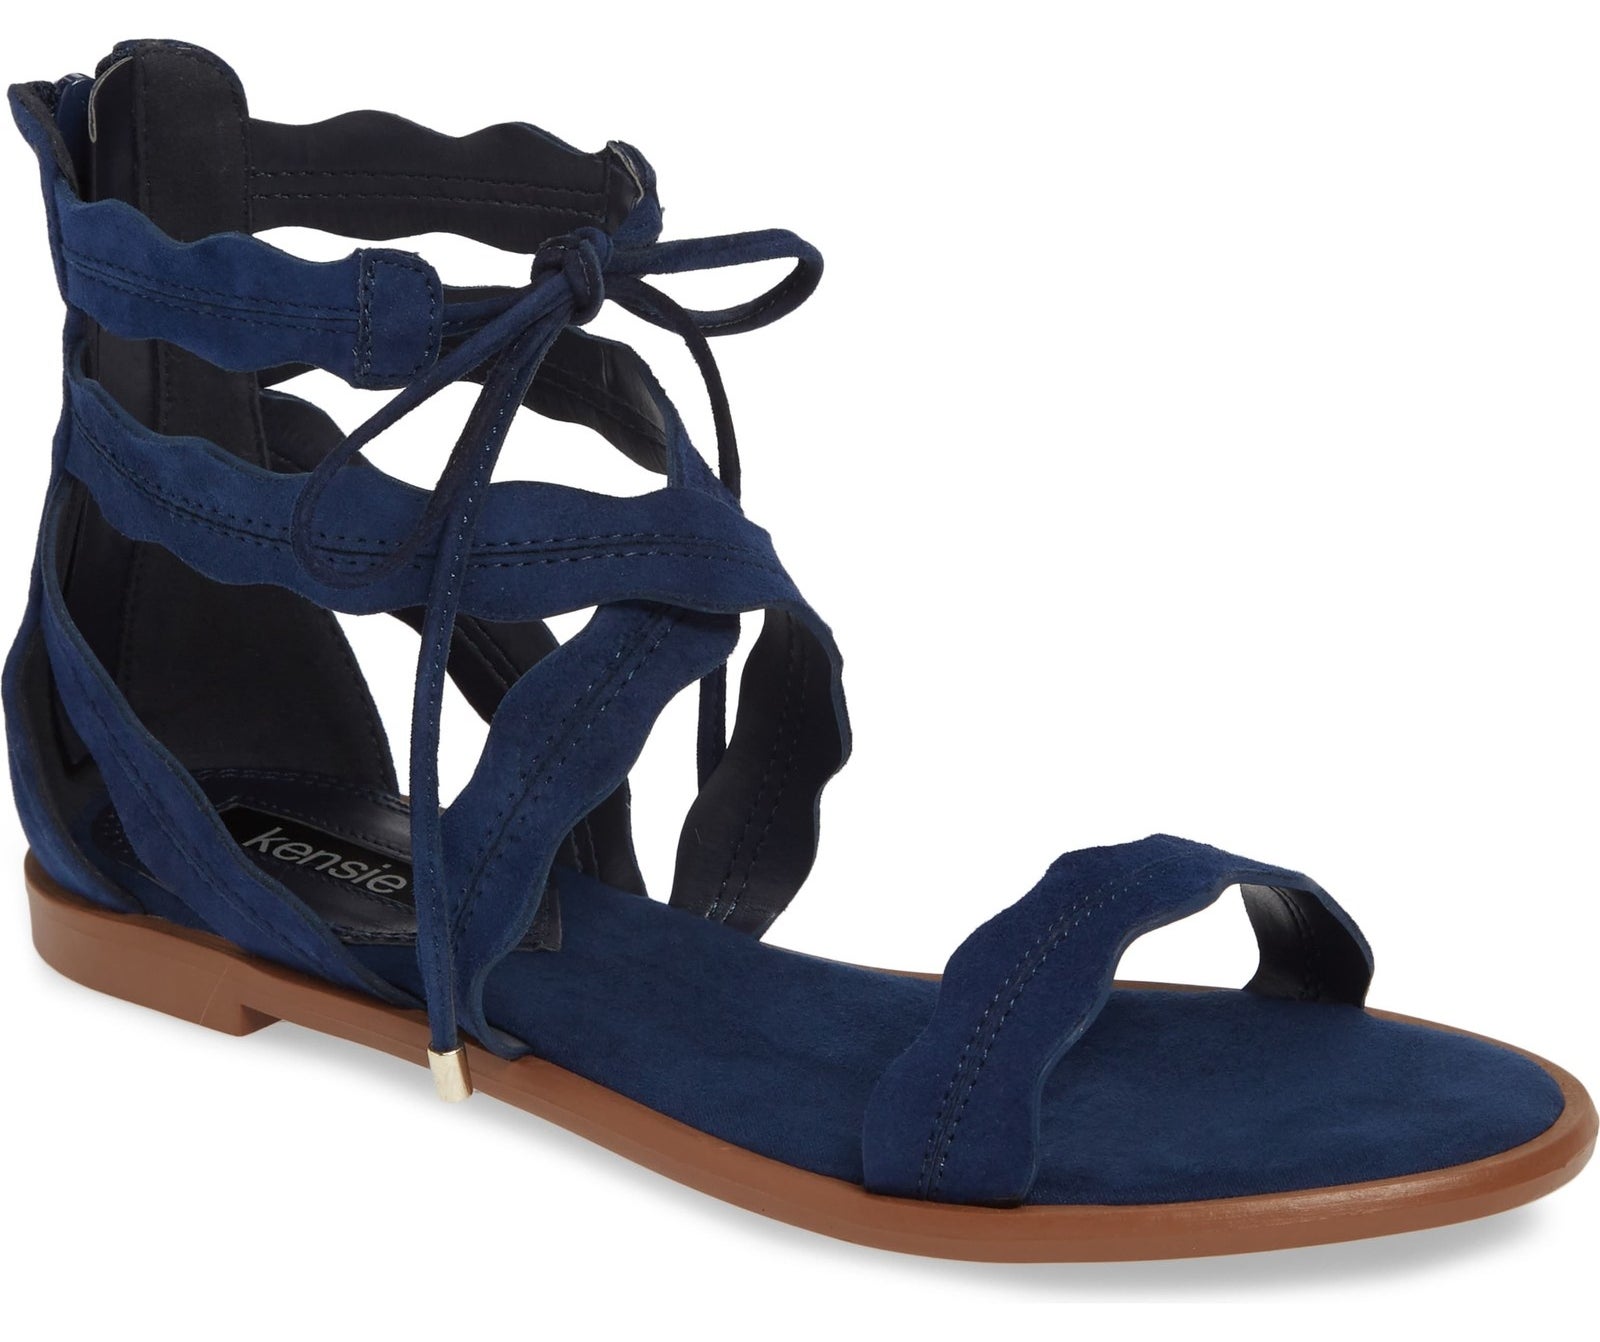 21 Strappy Sandals You'll Want To Wear All Summer Long